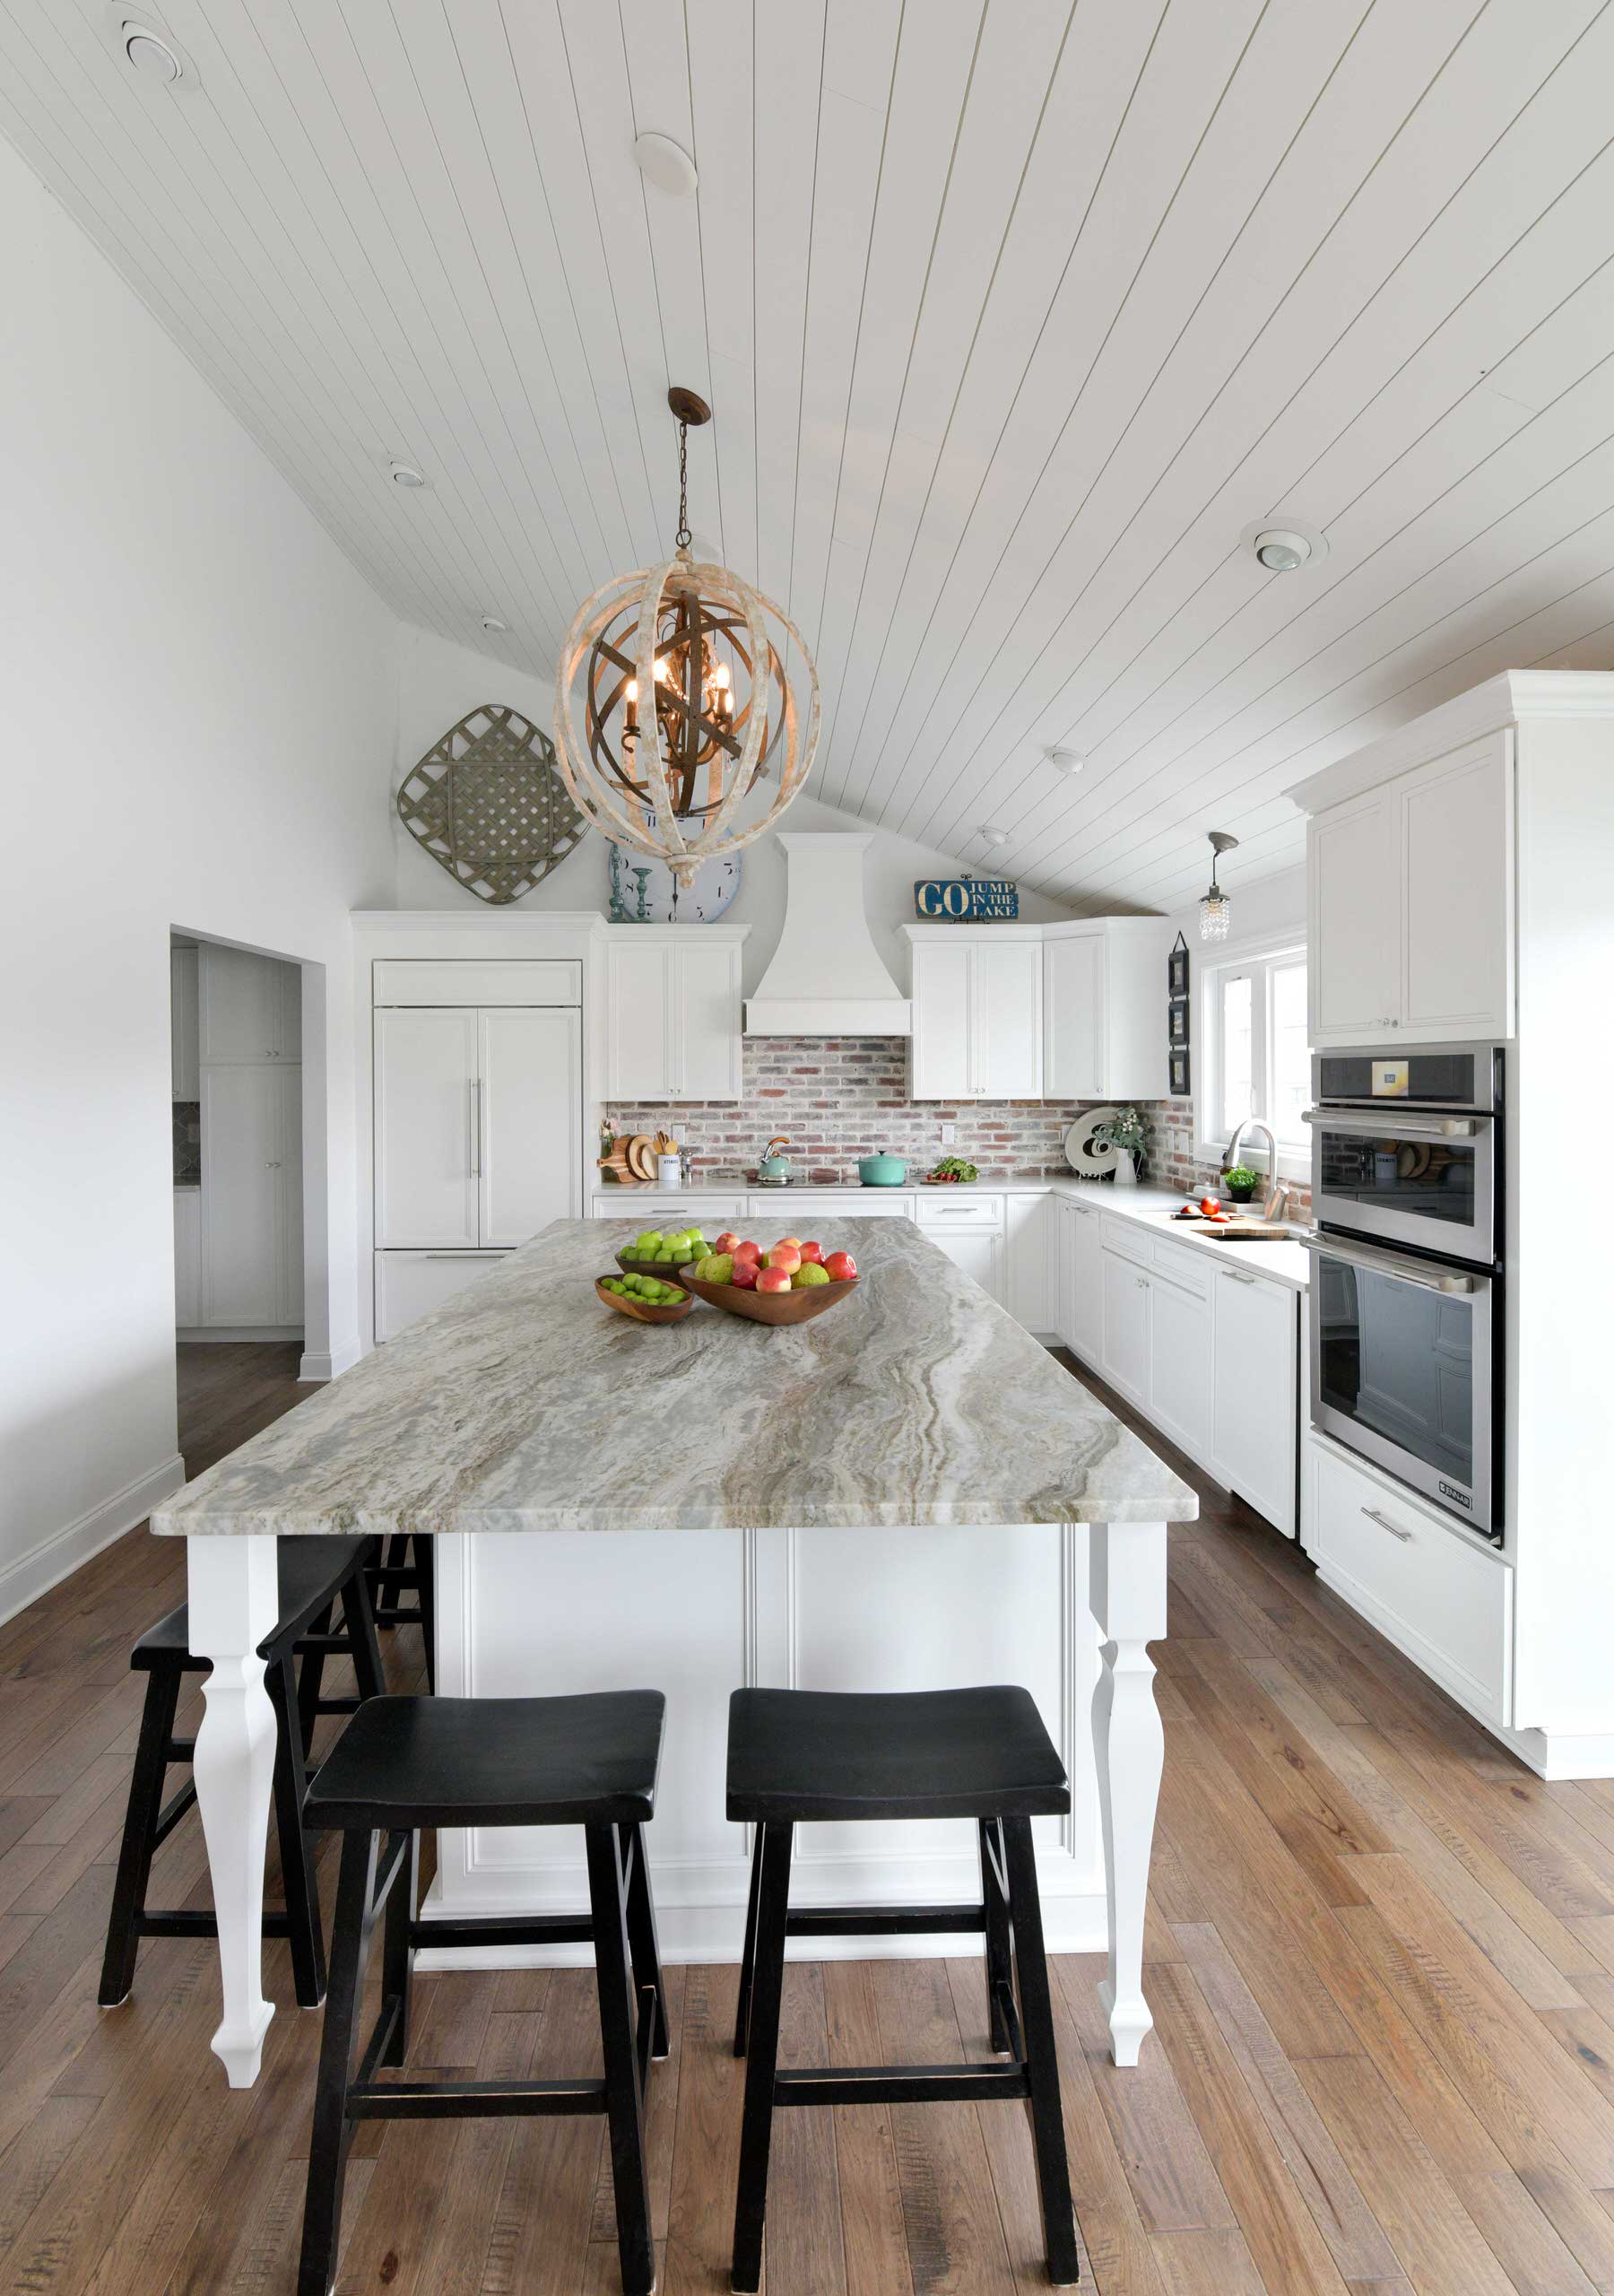 75 Beautiful Kitchen With Granite Countertops Pictures Ideas March 2021 Houzz